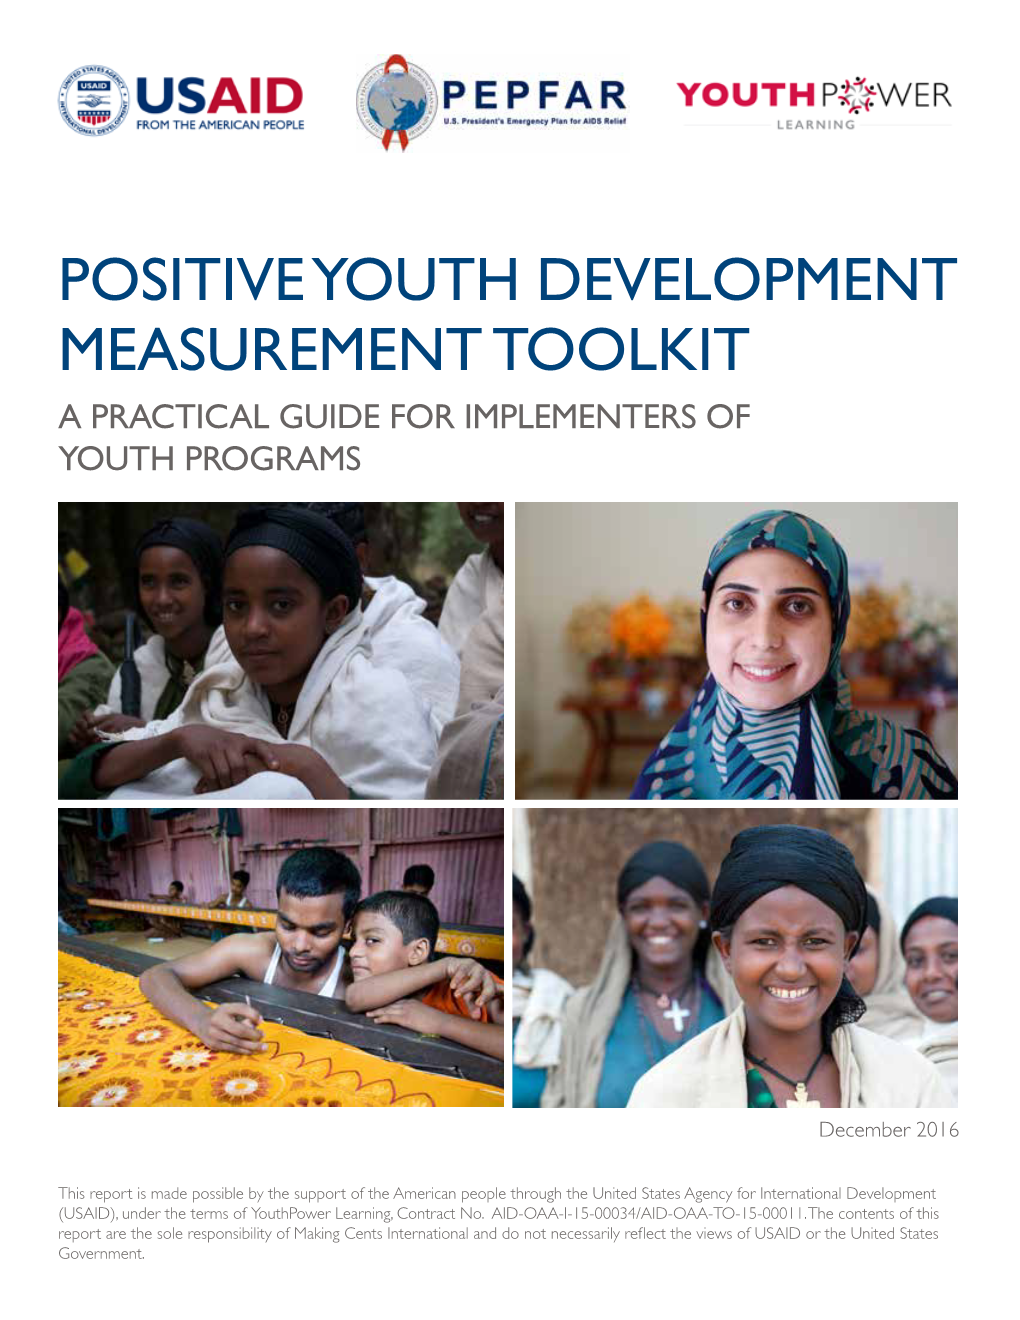 Positive Youth Development (PYD) Measurement Toolkit